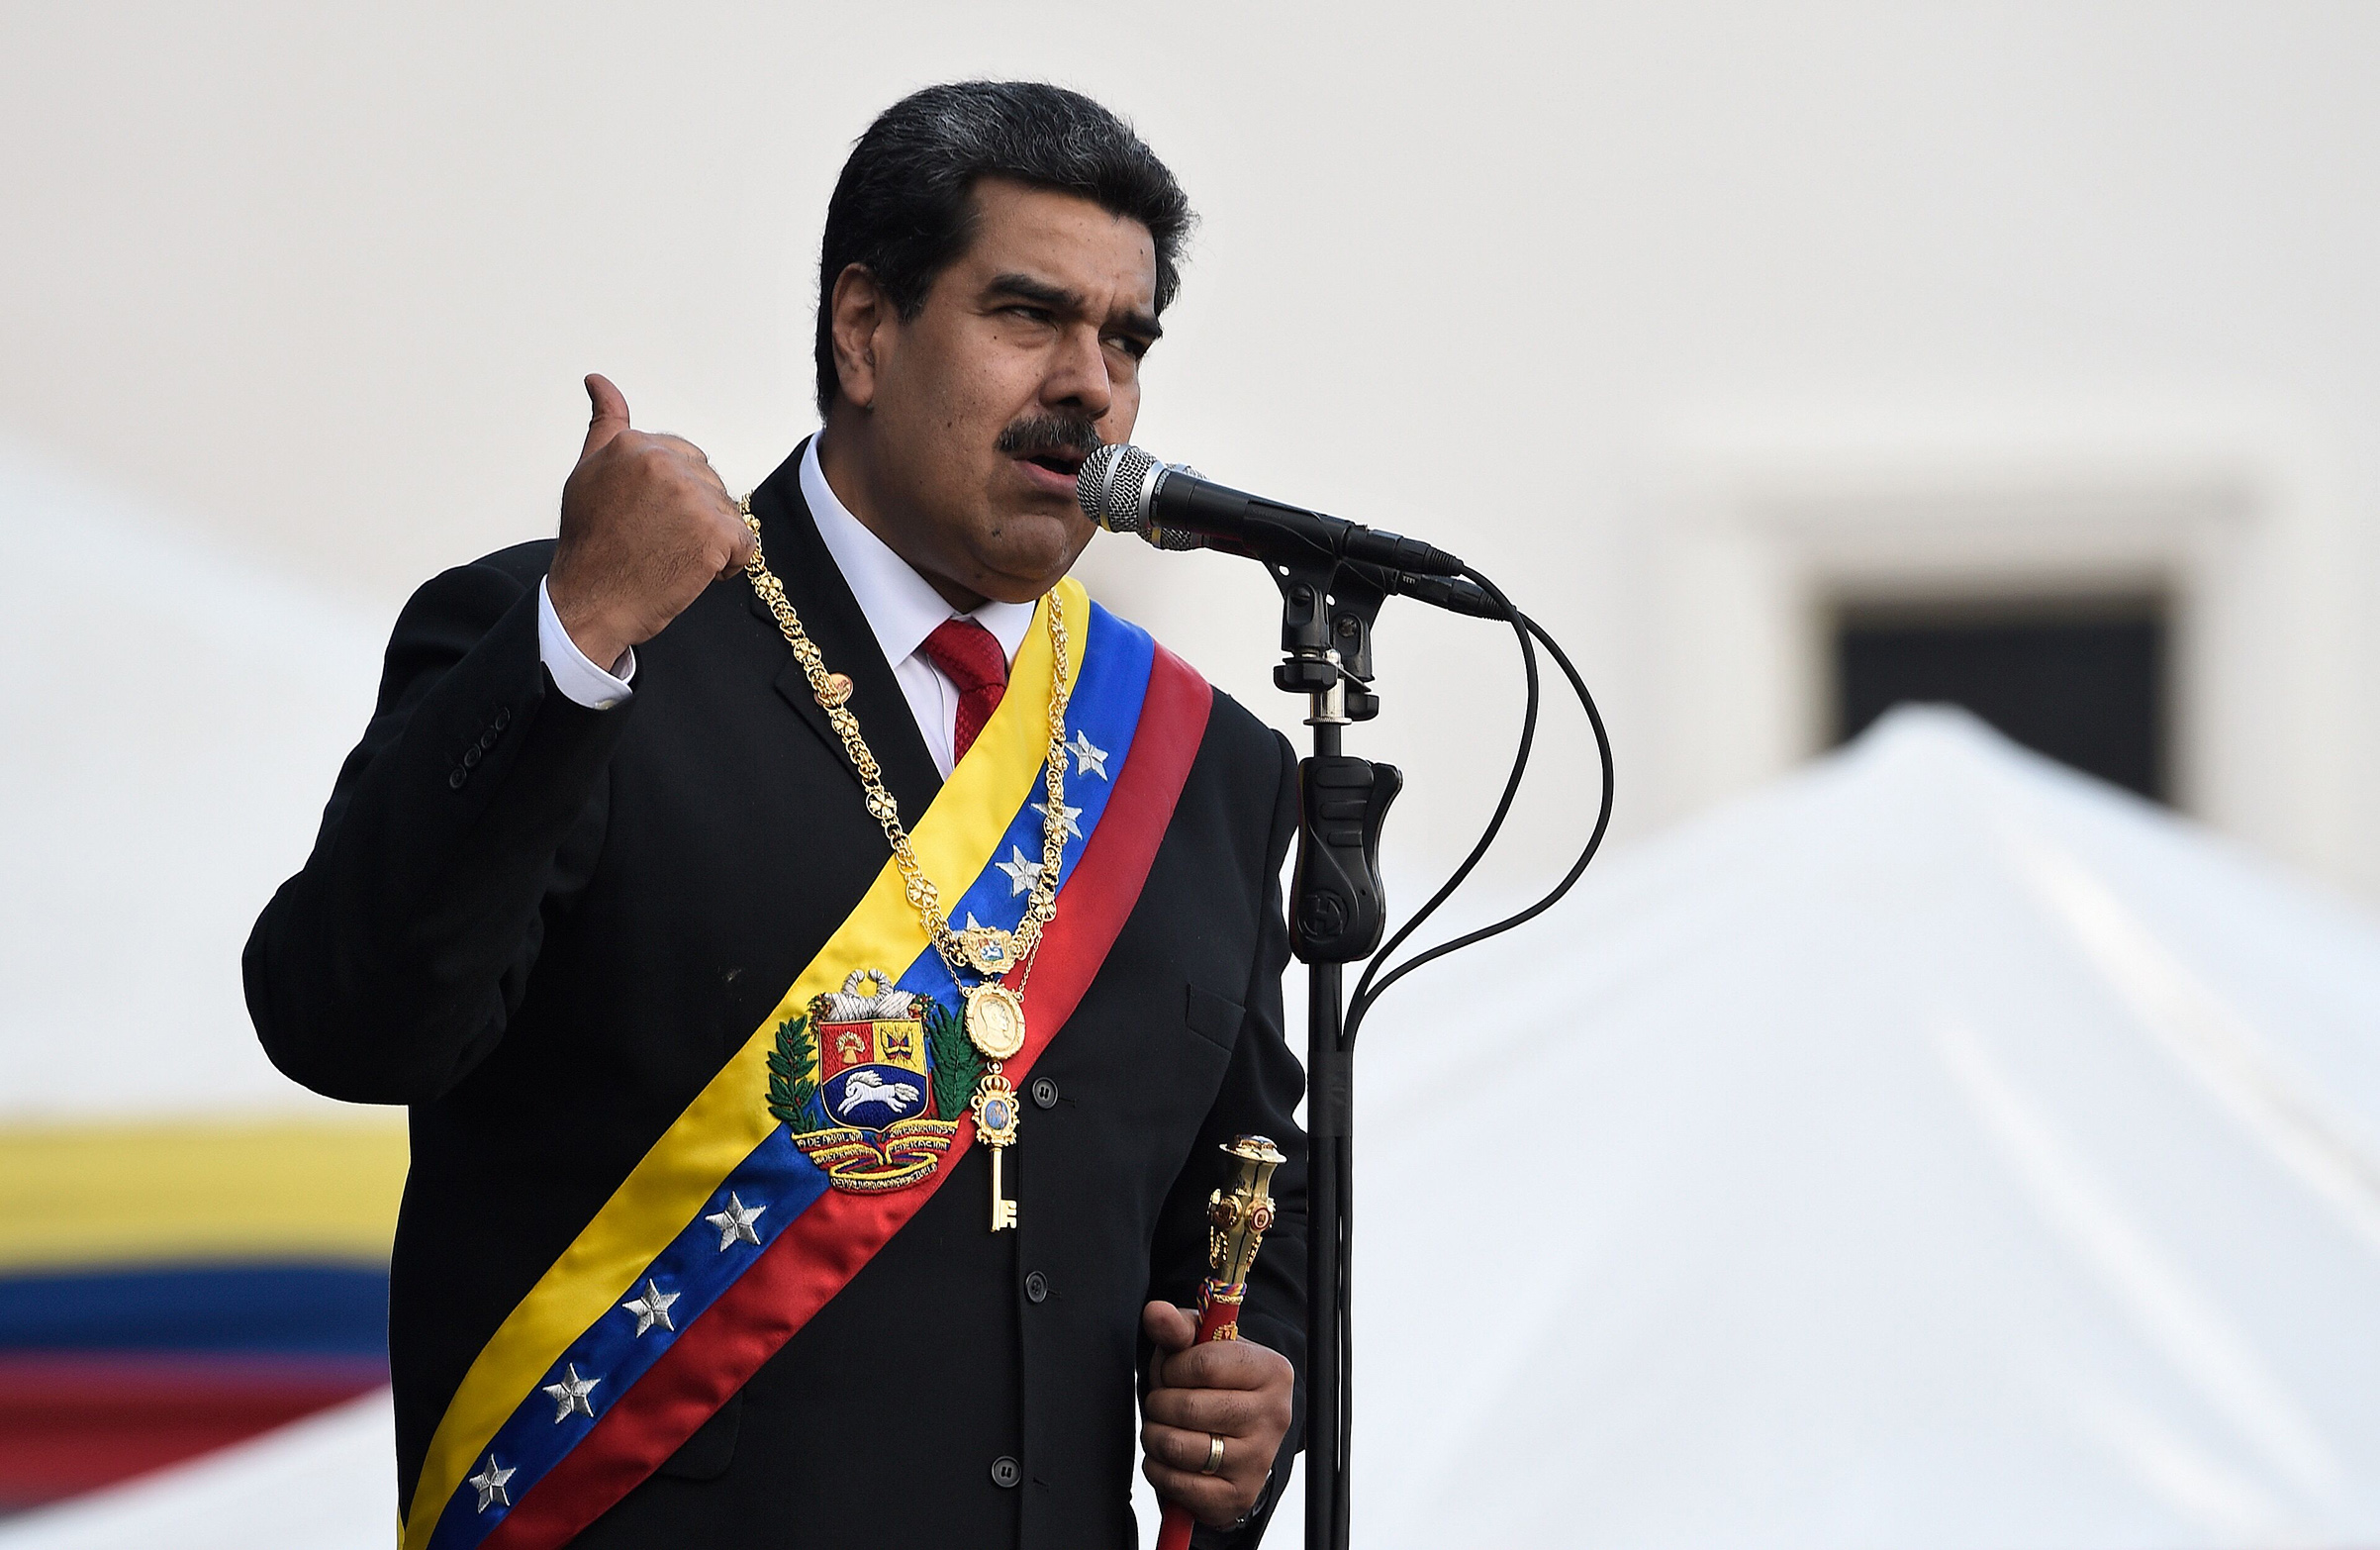 Venezuela's President Nicolas Maduro delivers a speech during the ceremony of recognition by the Bolivarian National Armed Forces (FANB) after being sworn in for a second term, at the Fuerte Tiuna Military Complex, in Caracas on January 10, 2019. (Federico Parra—AFP/Getty Images)